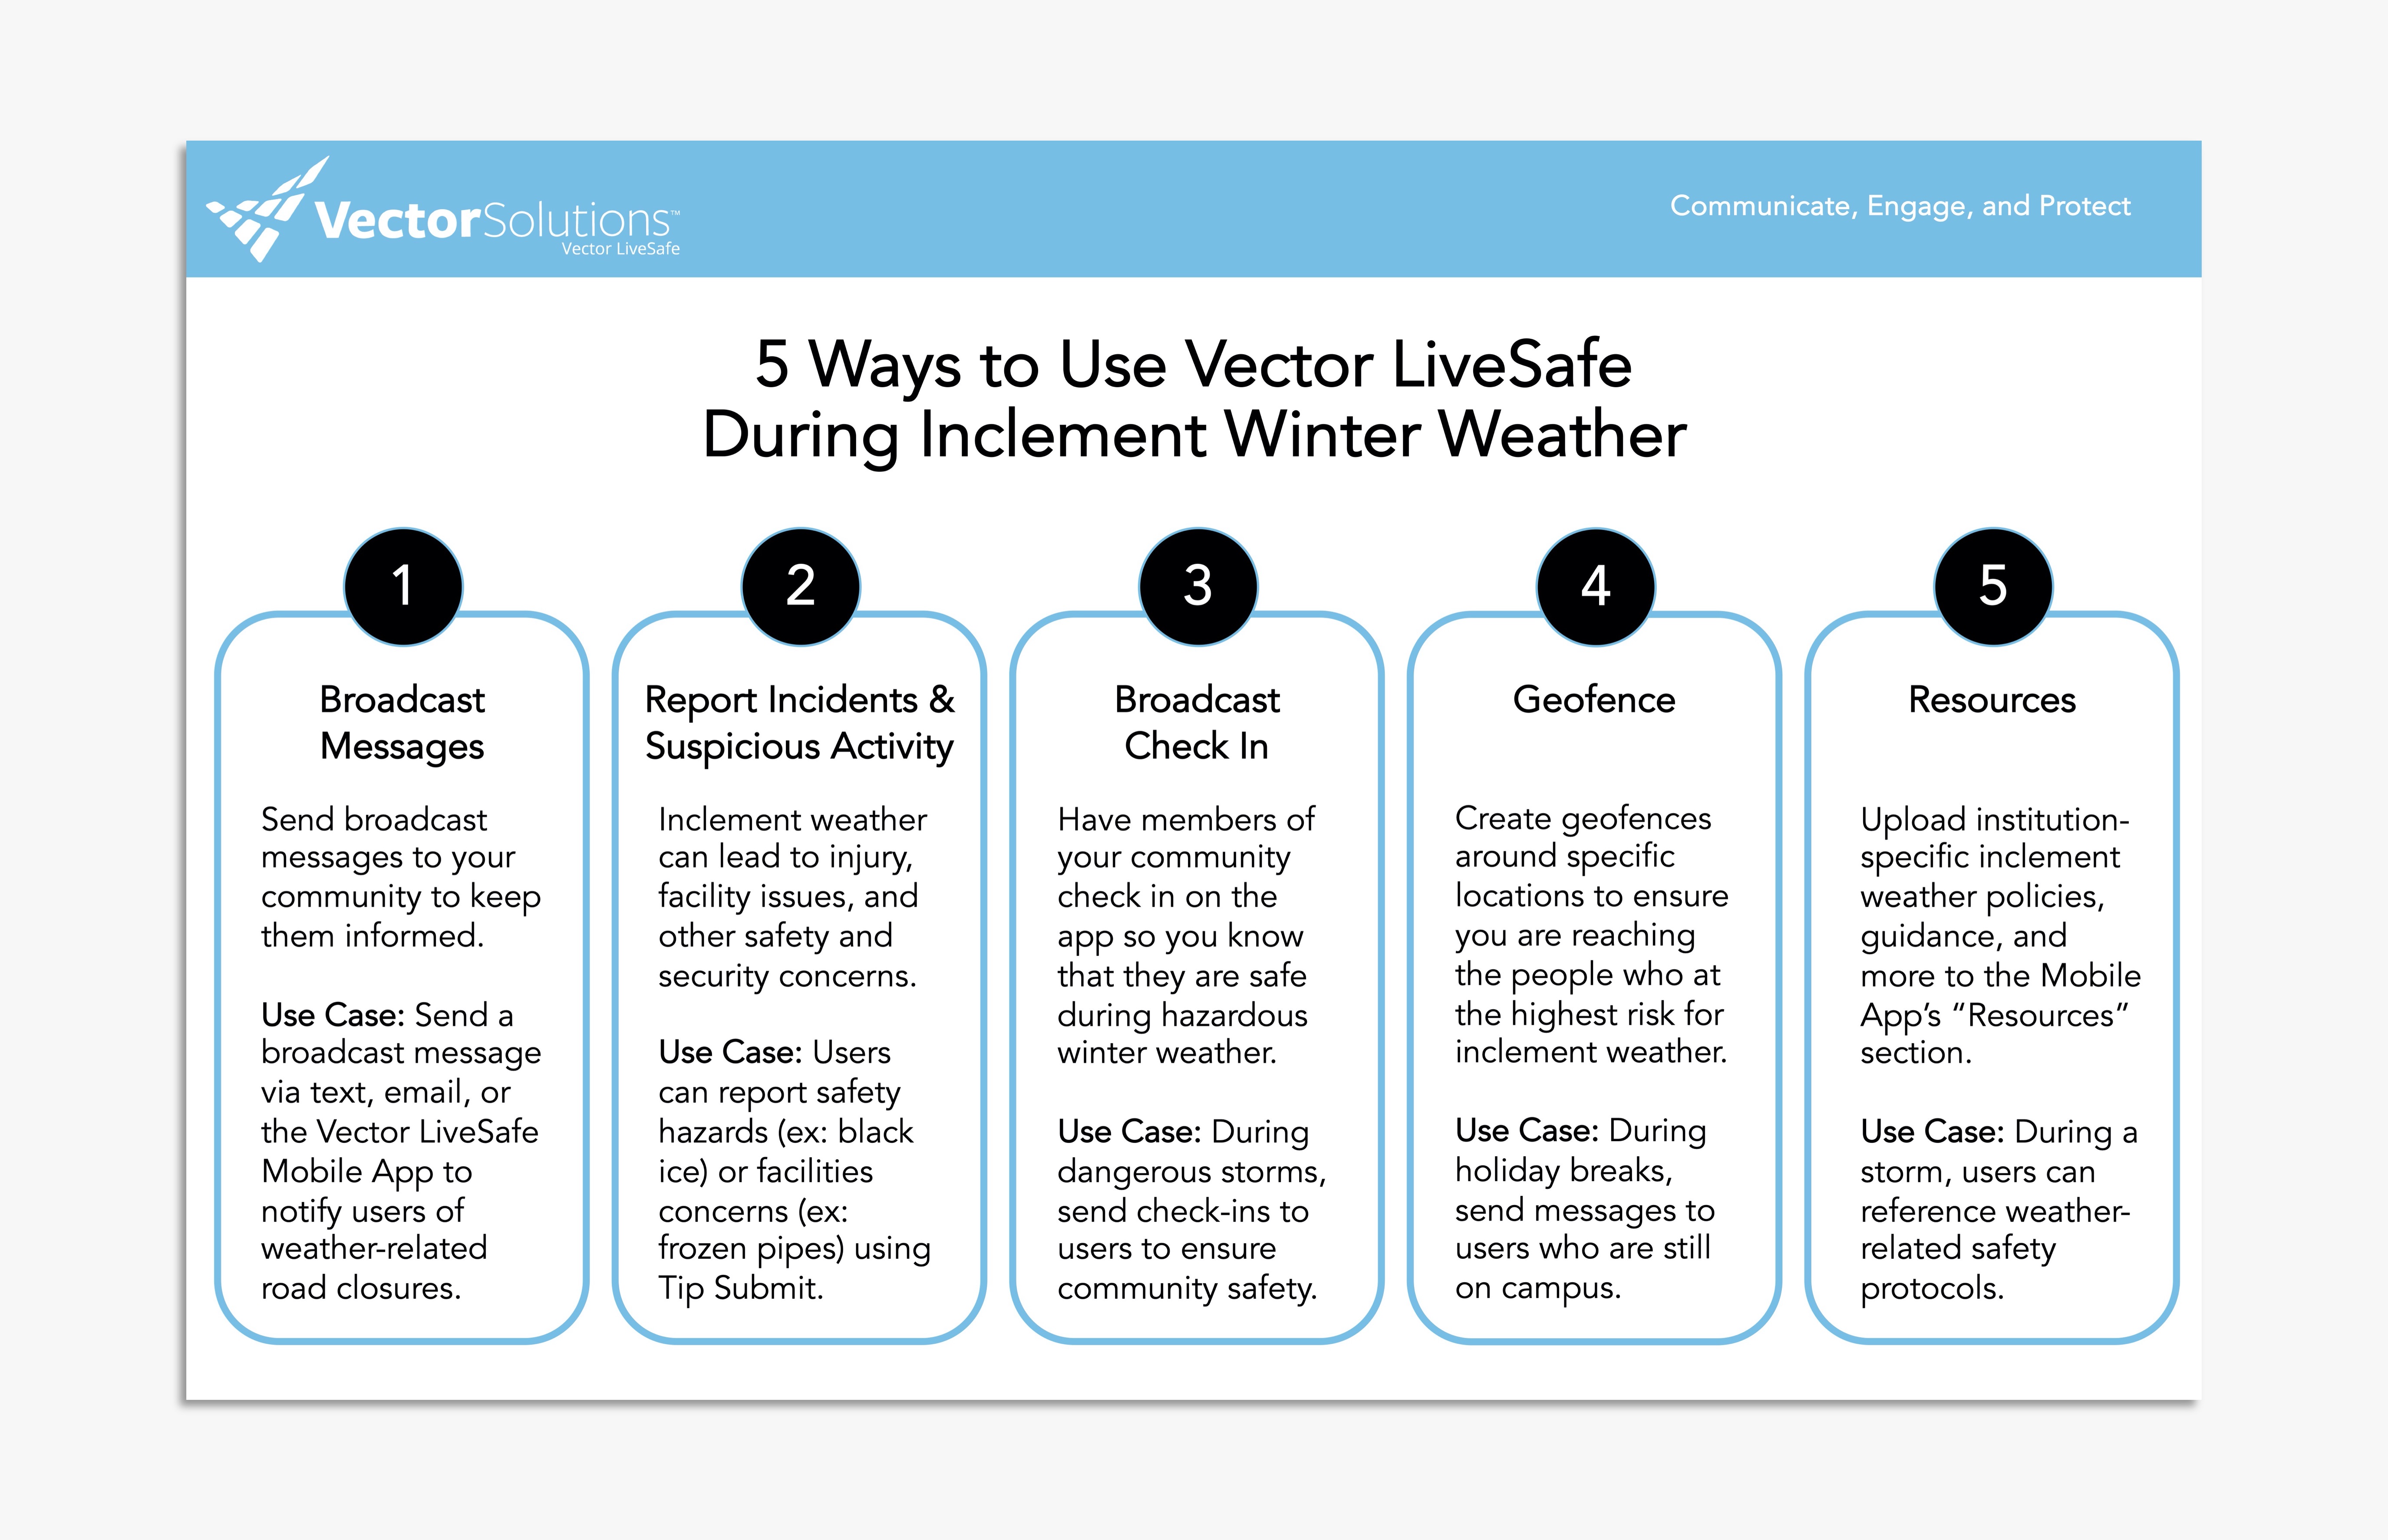 5 Ways to Use VLS for Inclement Weather Toolkit Image EDU